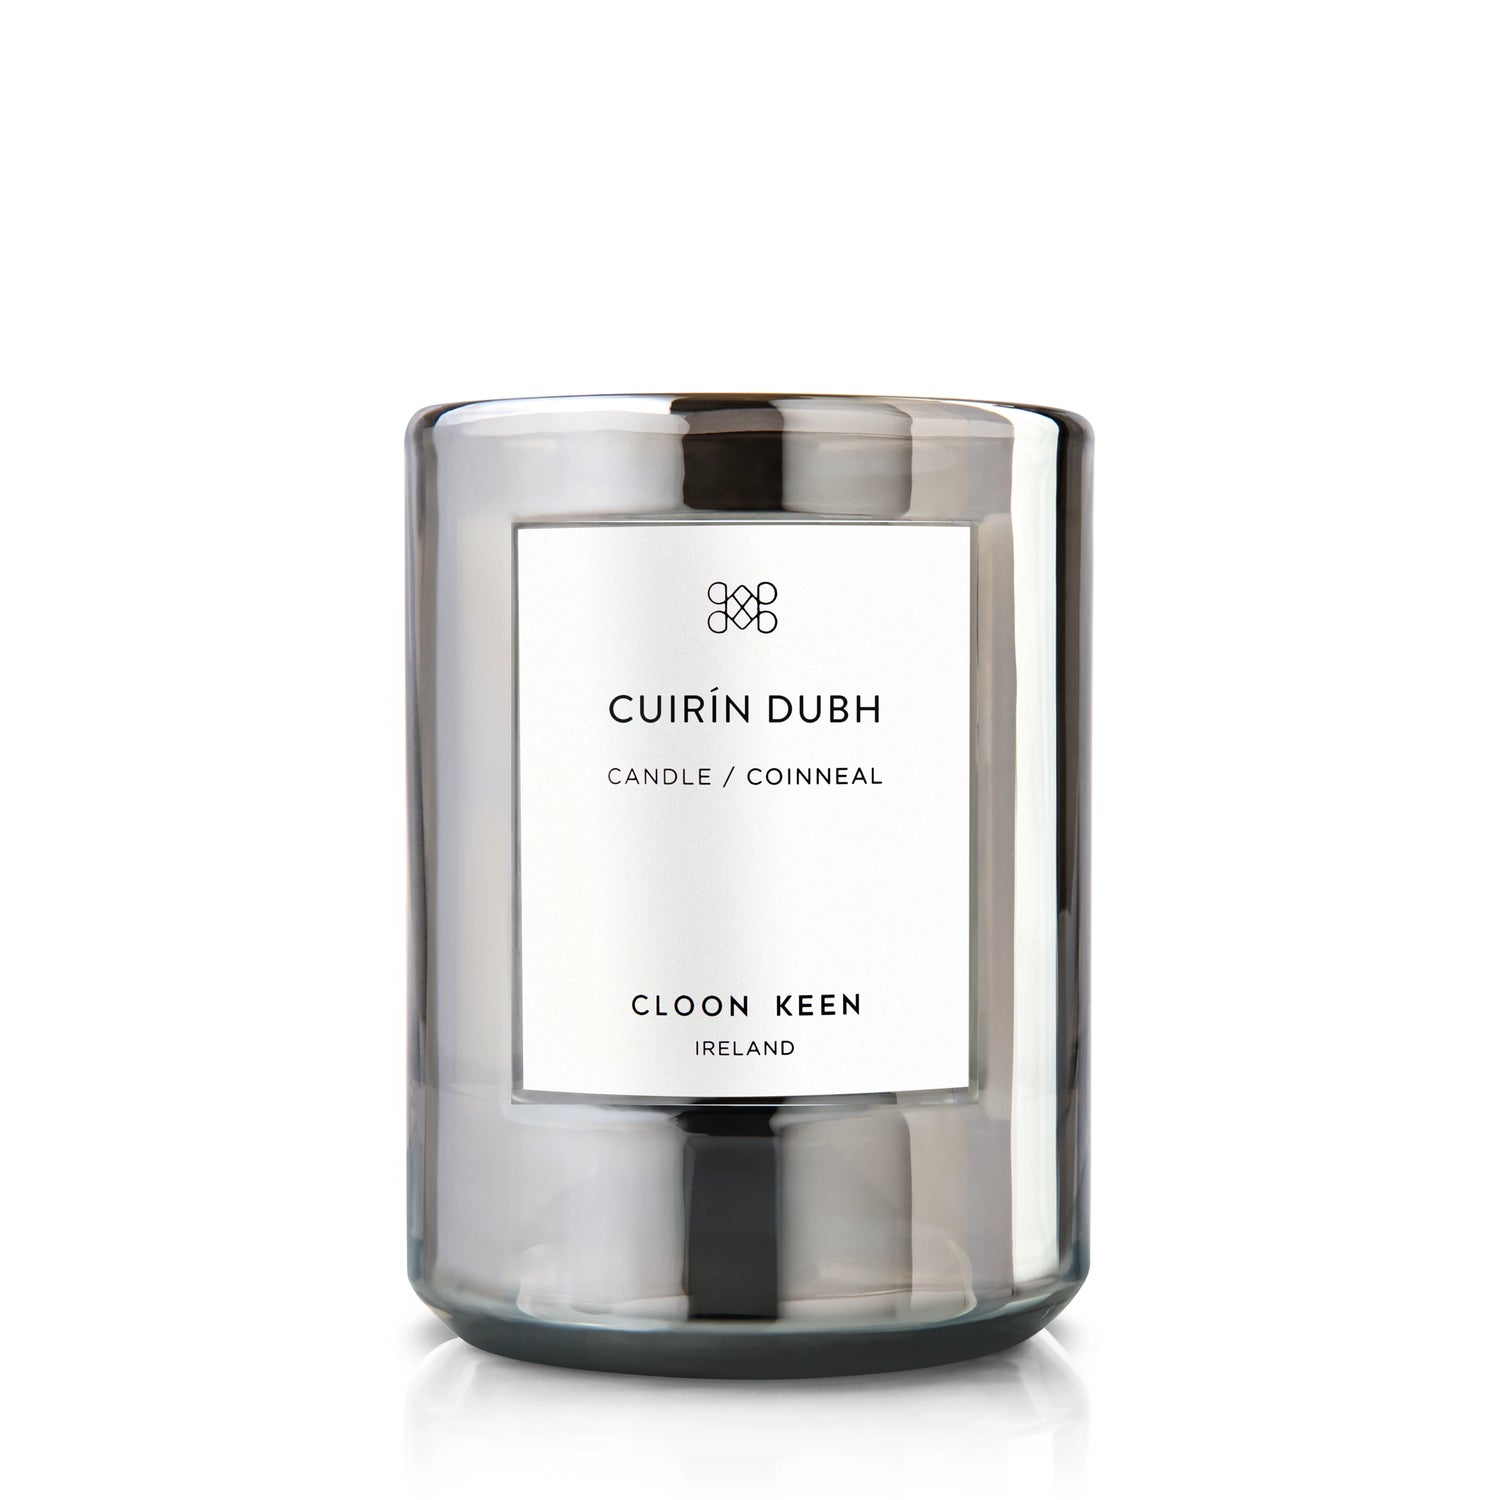 Discover Cloon Keen Cuirín Dubh candle. Sun-ripened blackcurrants, laced with the freshness of mint, blend seamlessly with rose petals and a subtle hint of forest moss.